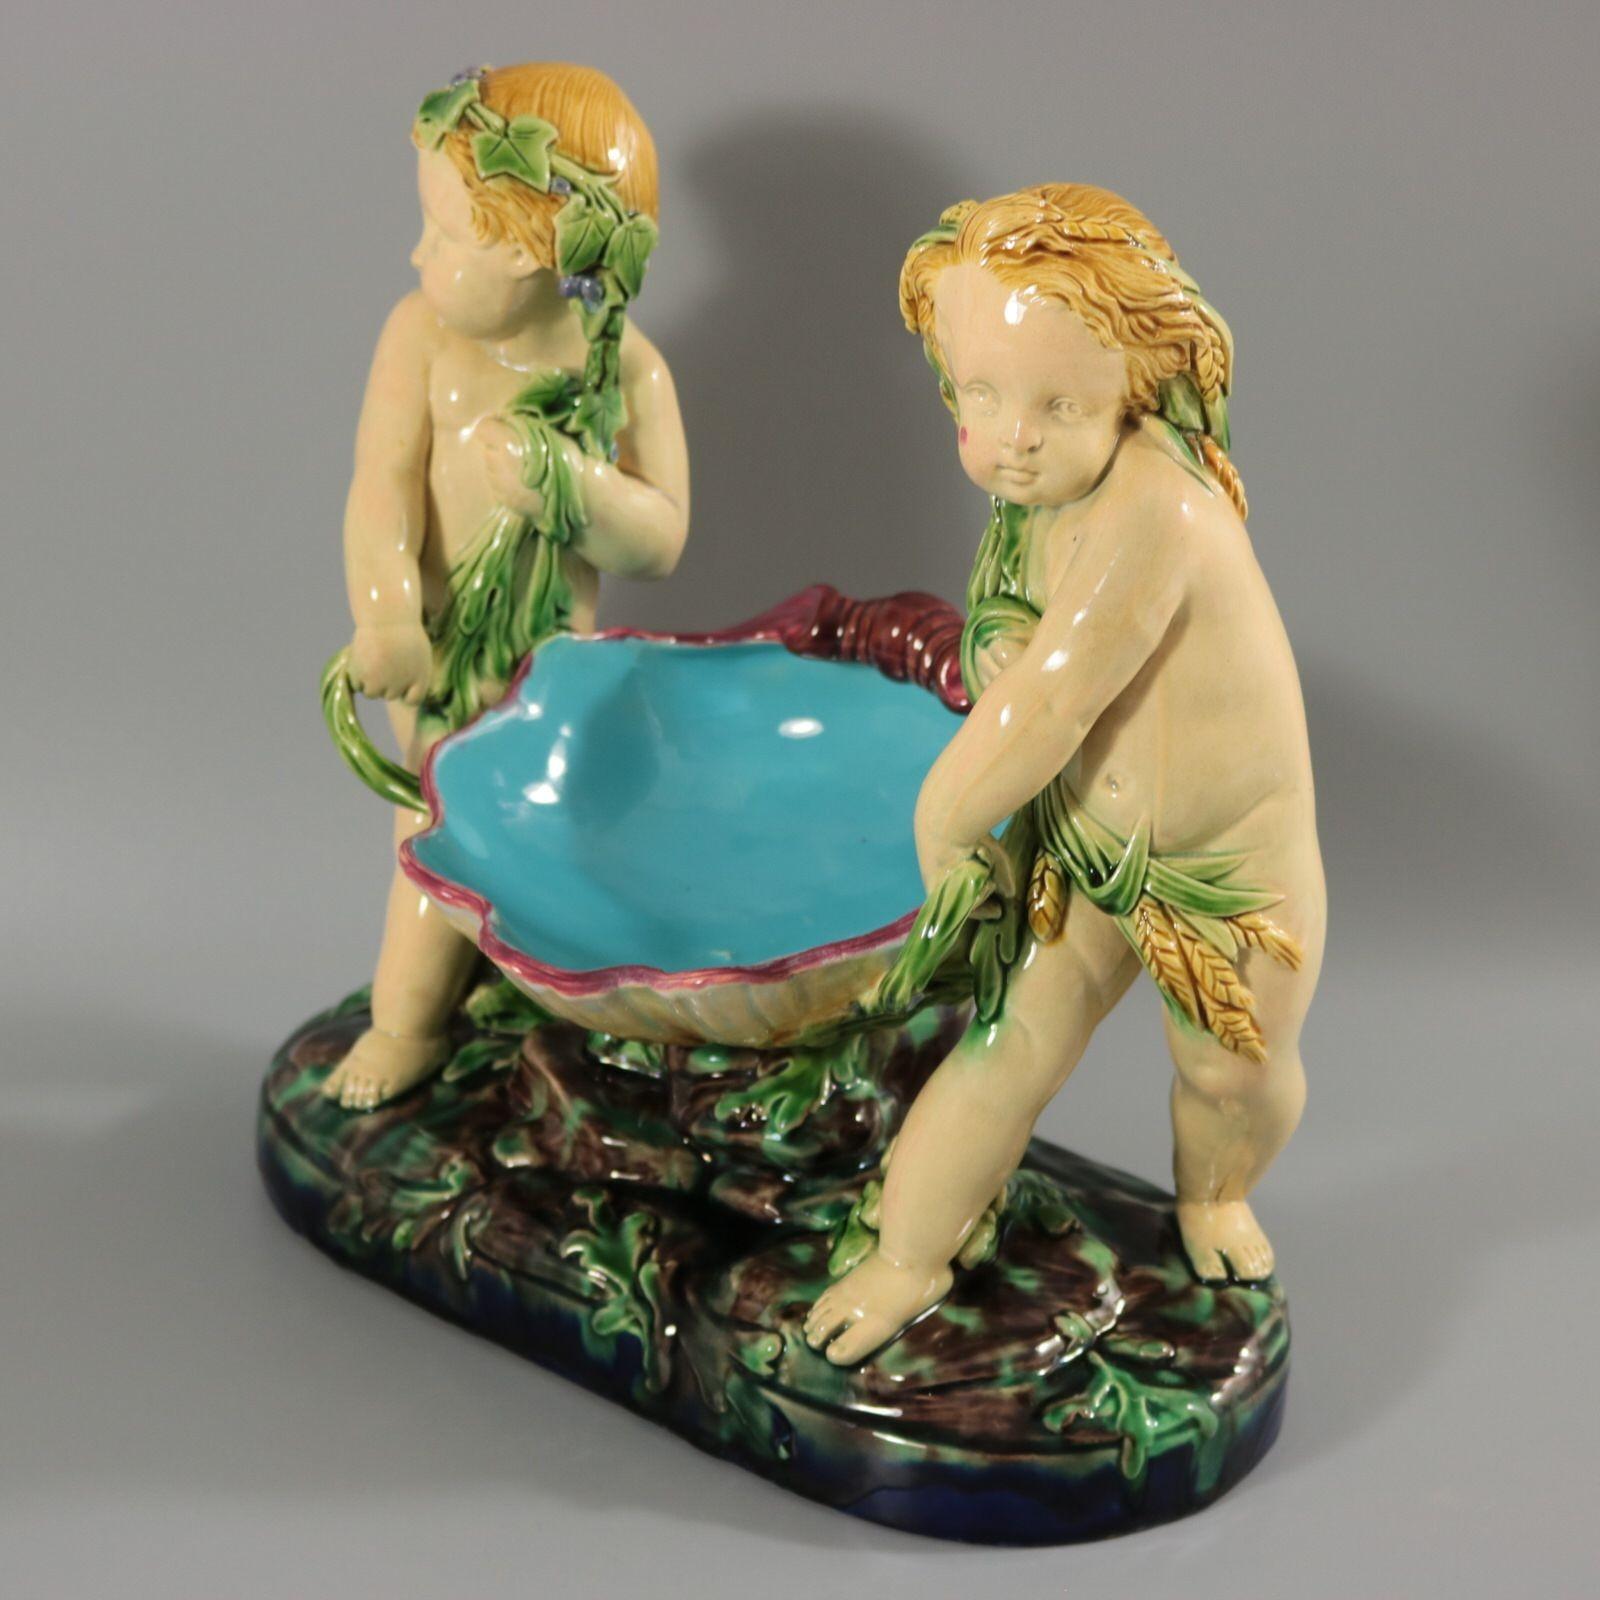 Minton Majolica figural which features two putti carrying a shell. One draped in grapes, the other draped in wheat. Colouration: green, turquoise, cream, are predominant. The piece bears maker's marks for the Minton pottery. Bears a pattern number,